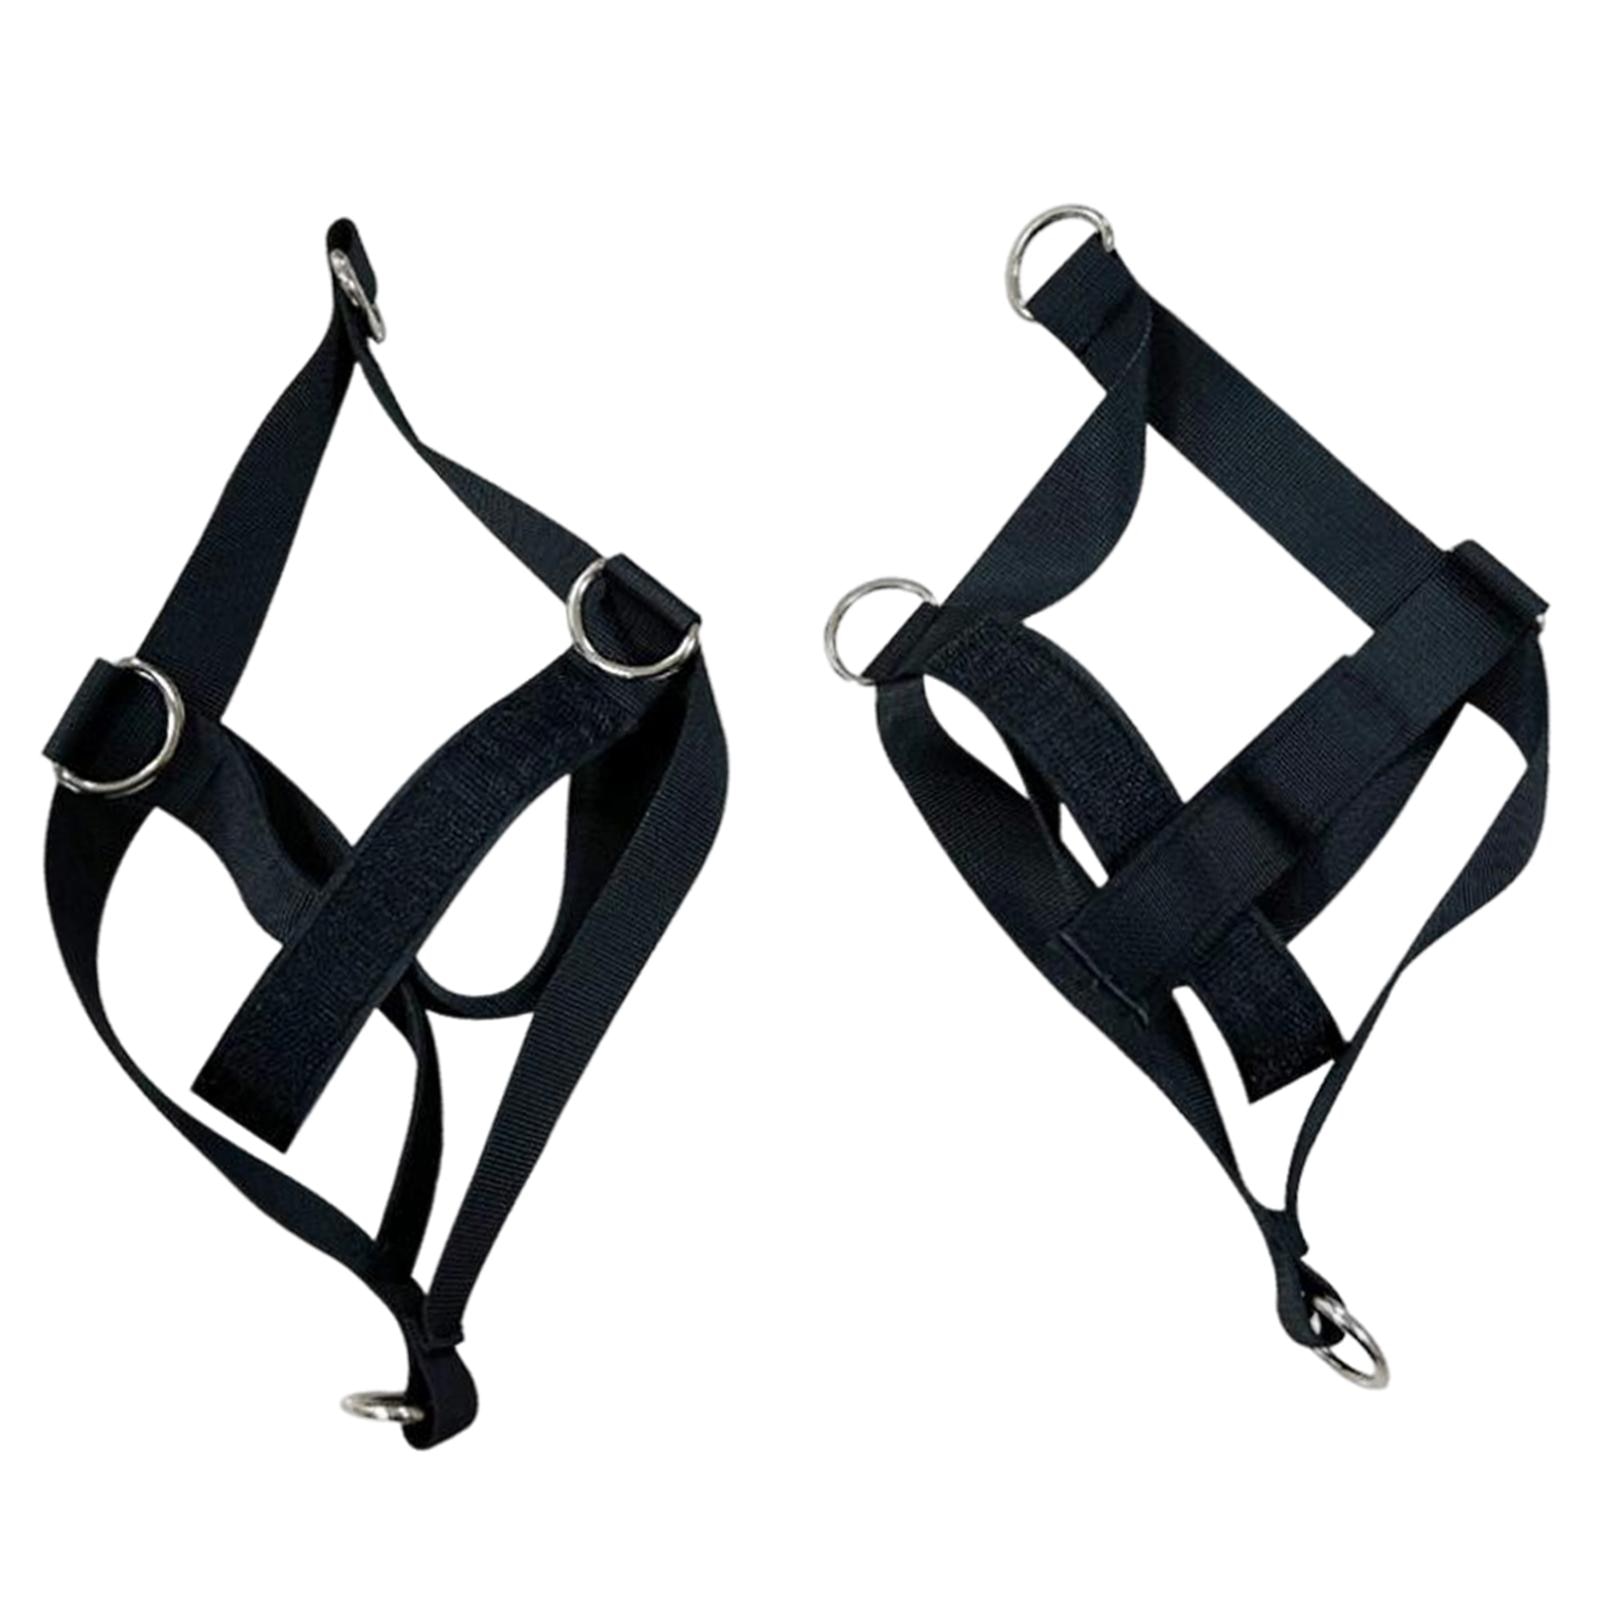 2x Ankle Strap 4 Gym Machine Attachment for Fitness Bodybuilding